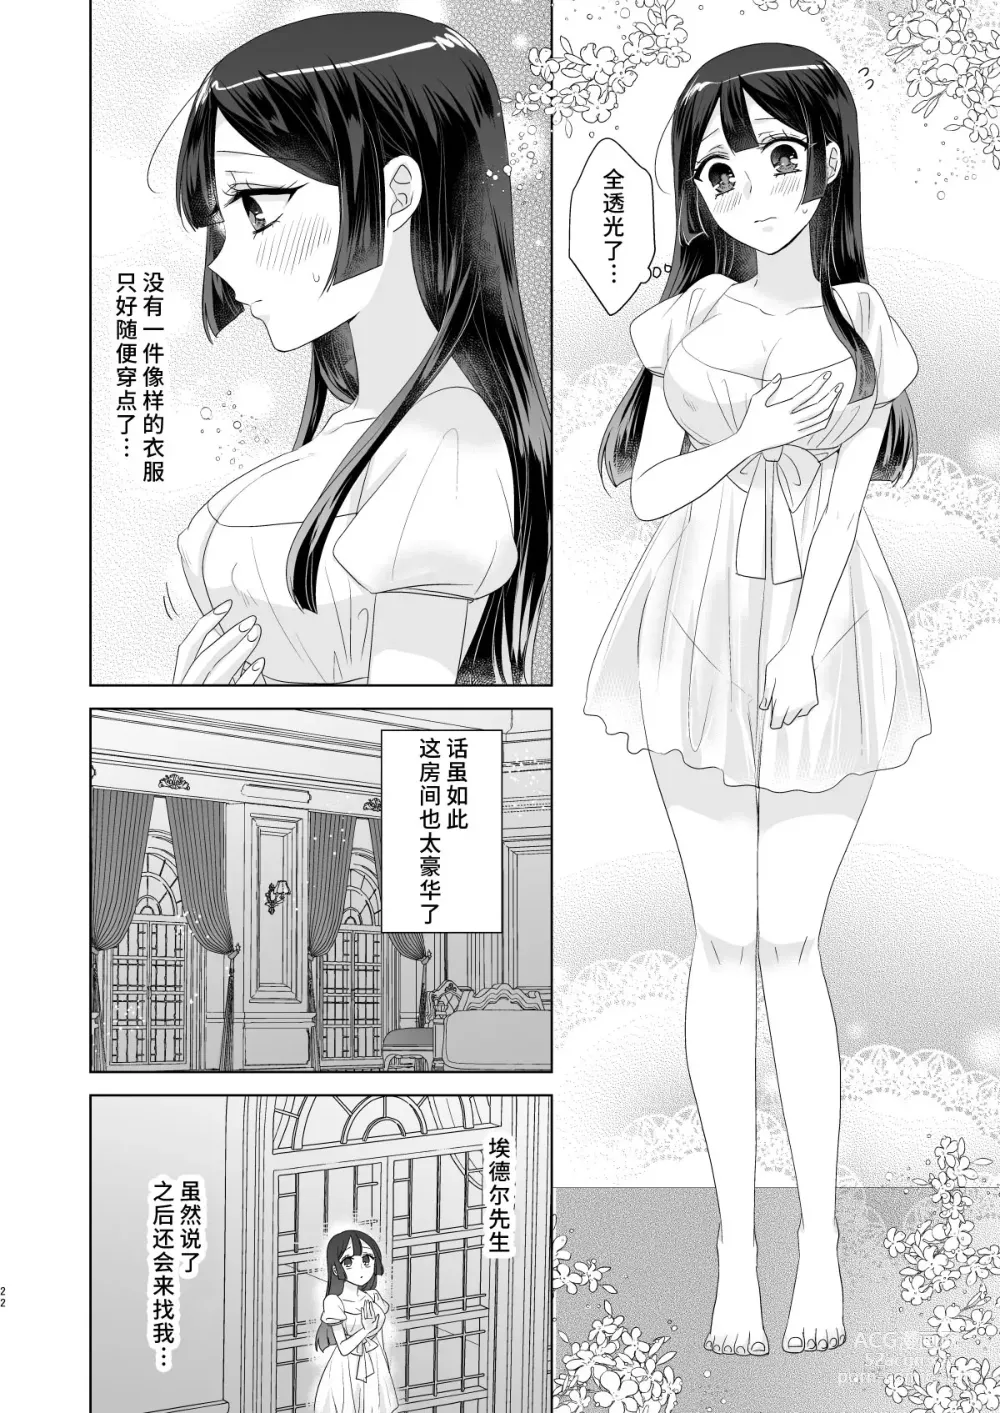 Page 21 of doujinshi 男大姐♂吸血鬼和少女